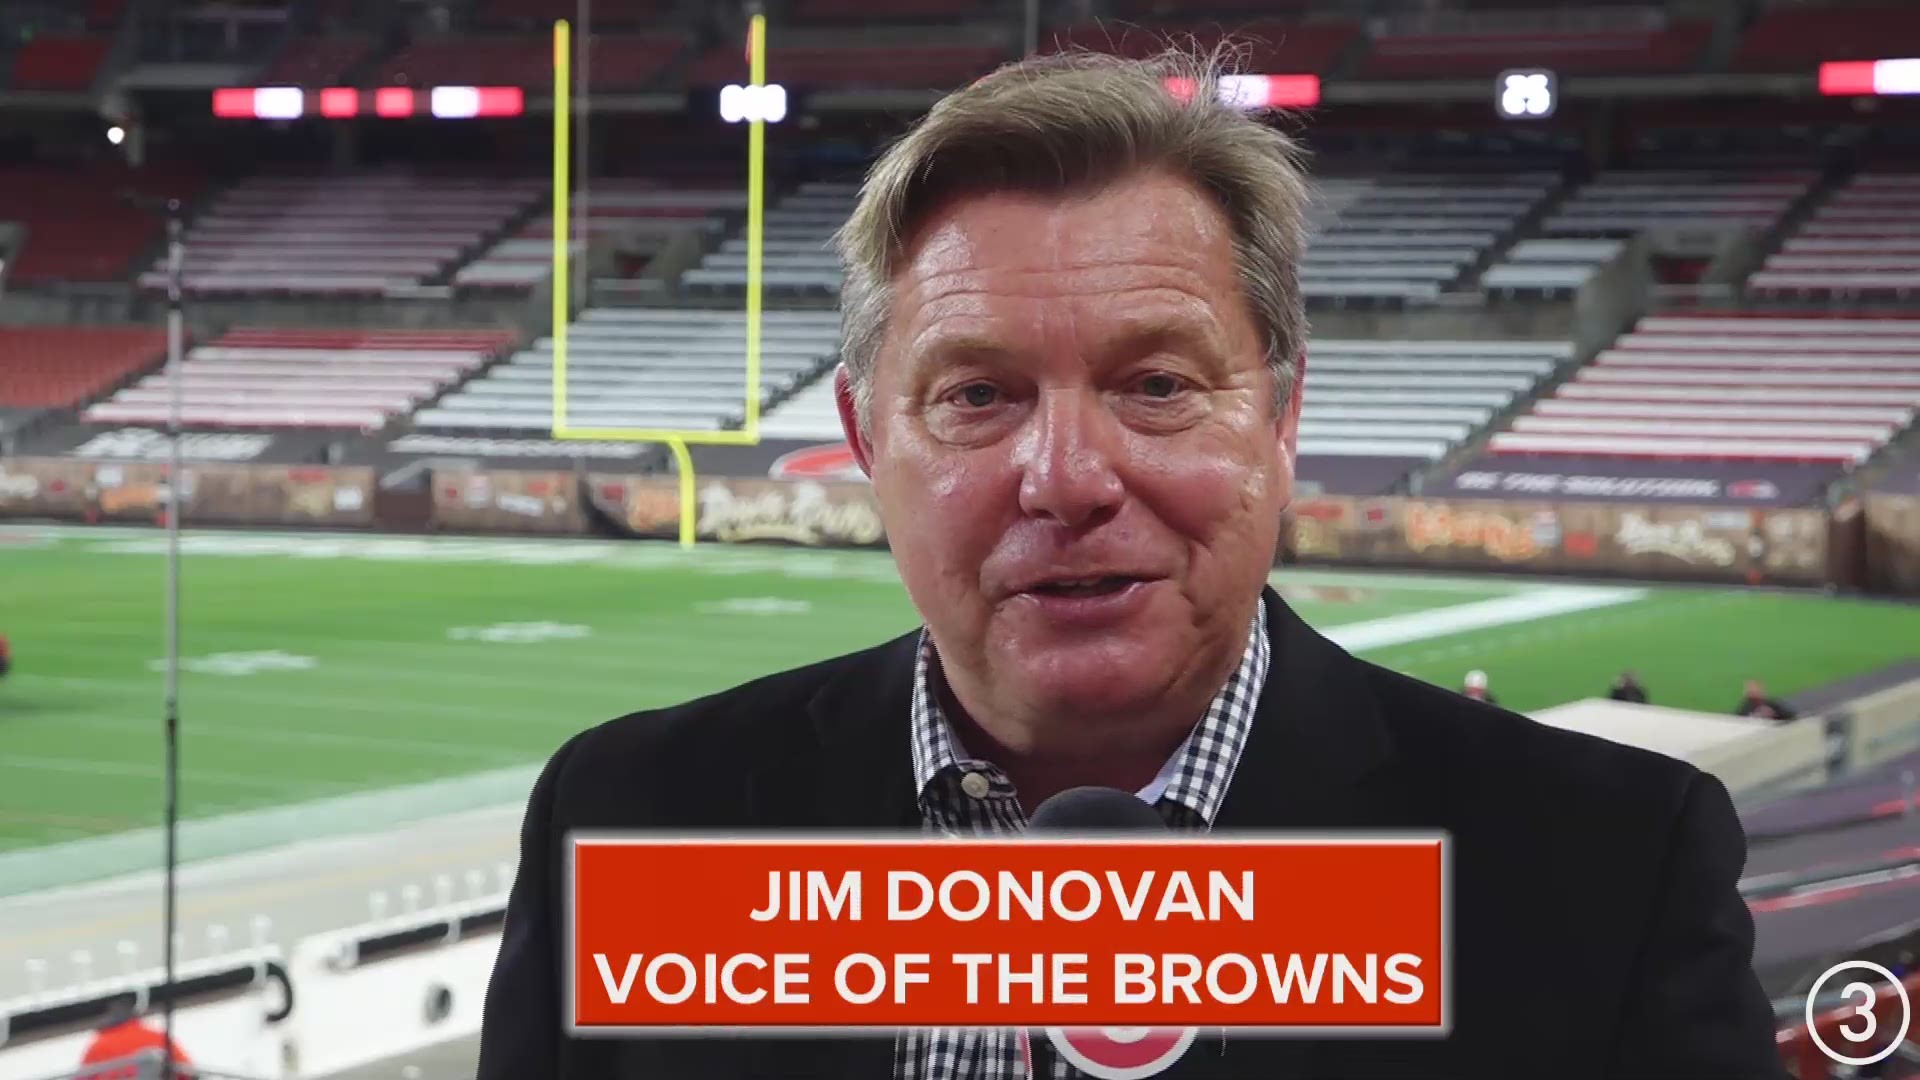 Voice of the Browns Jim Donovan gives his take of tonight's huge win!  The Browns travel to Pittsburgh next week to face the Steelers on Sunday.